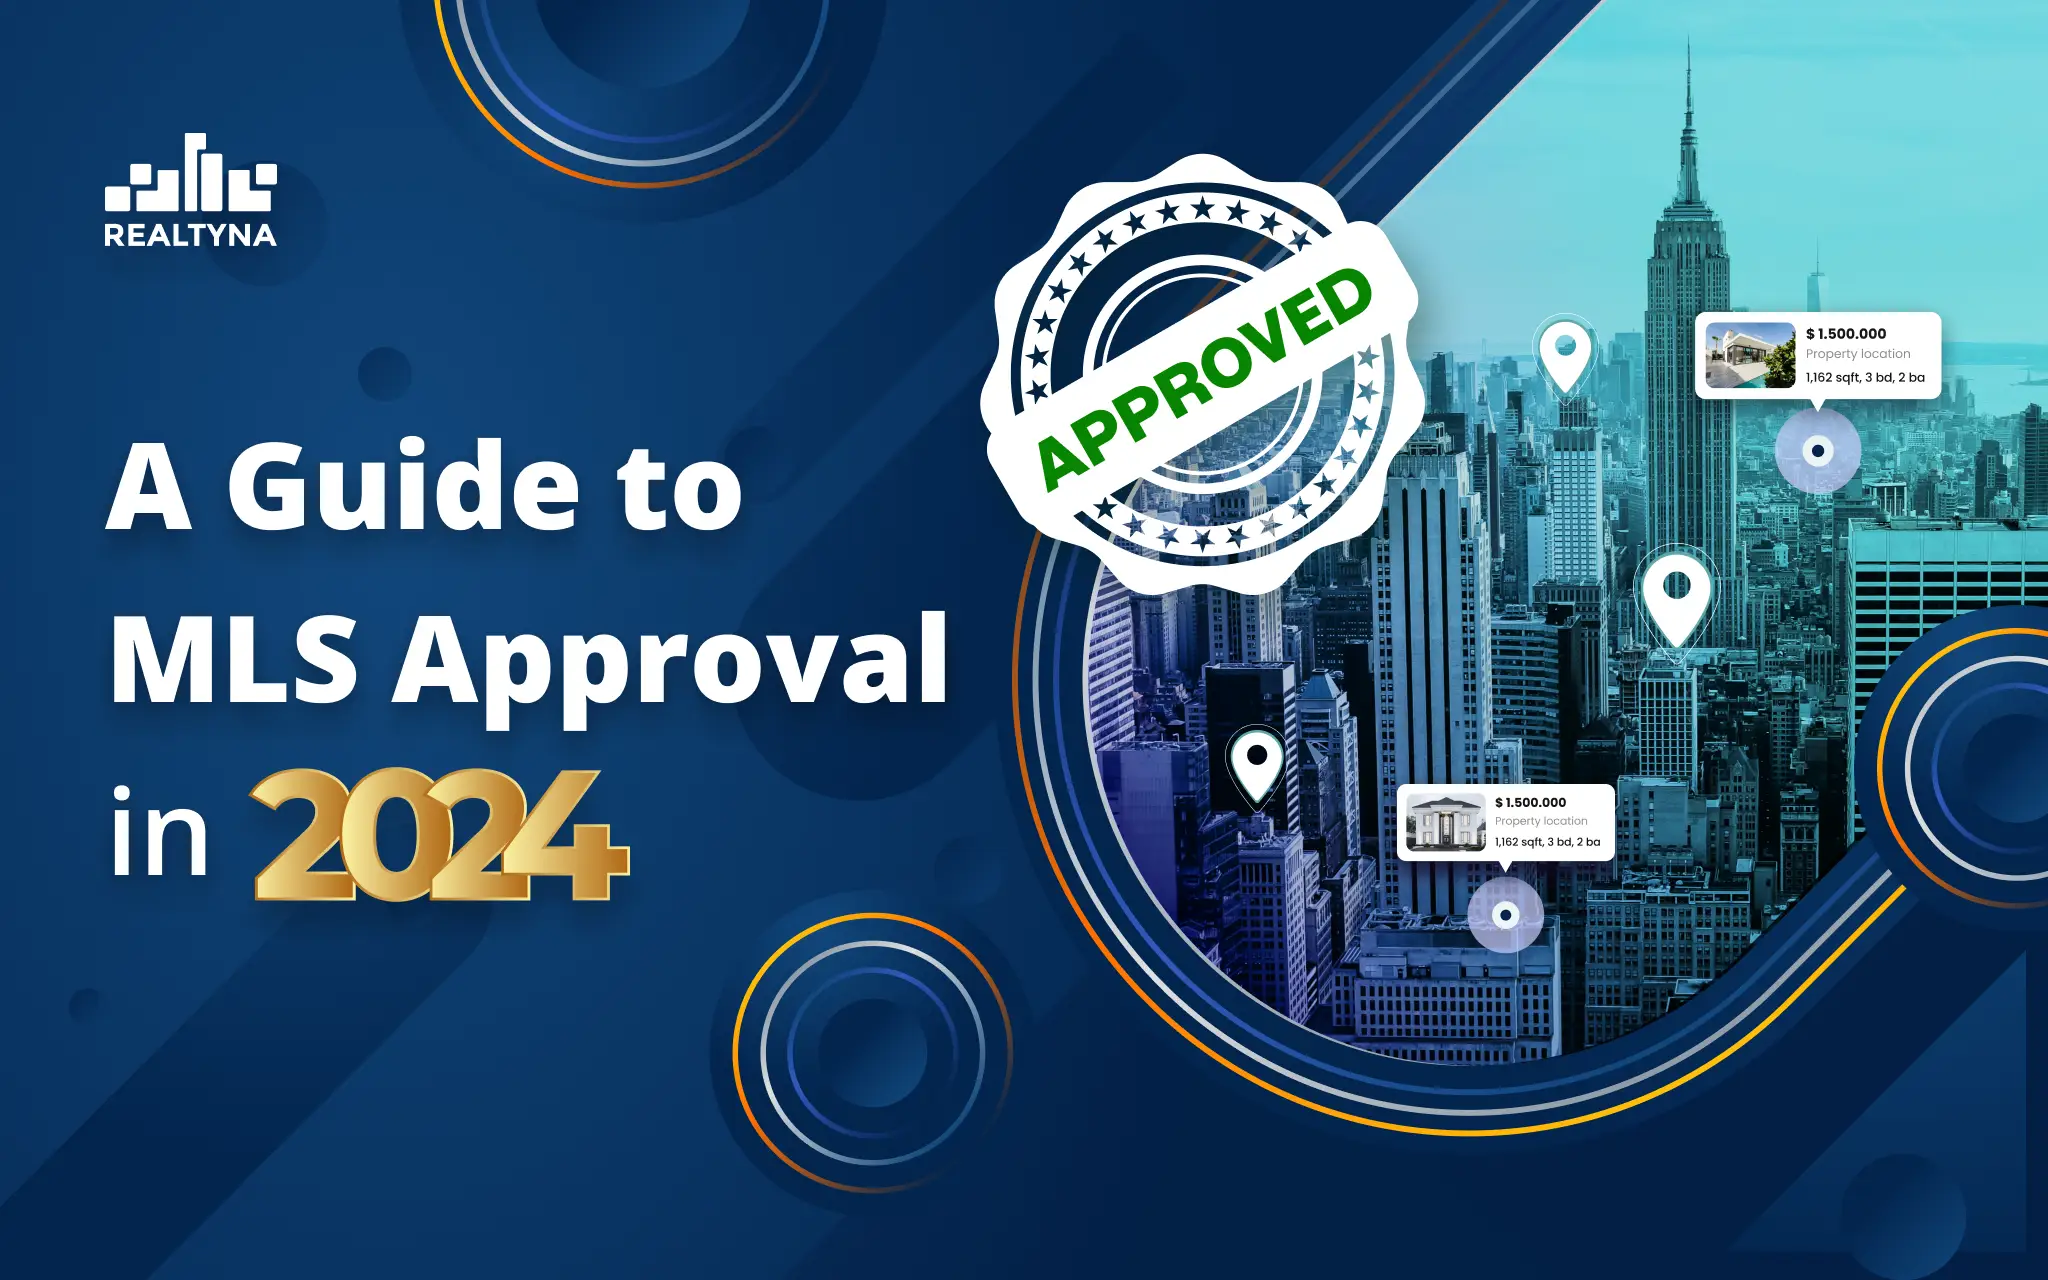 A Guide to MLS Approval in 2024